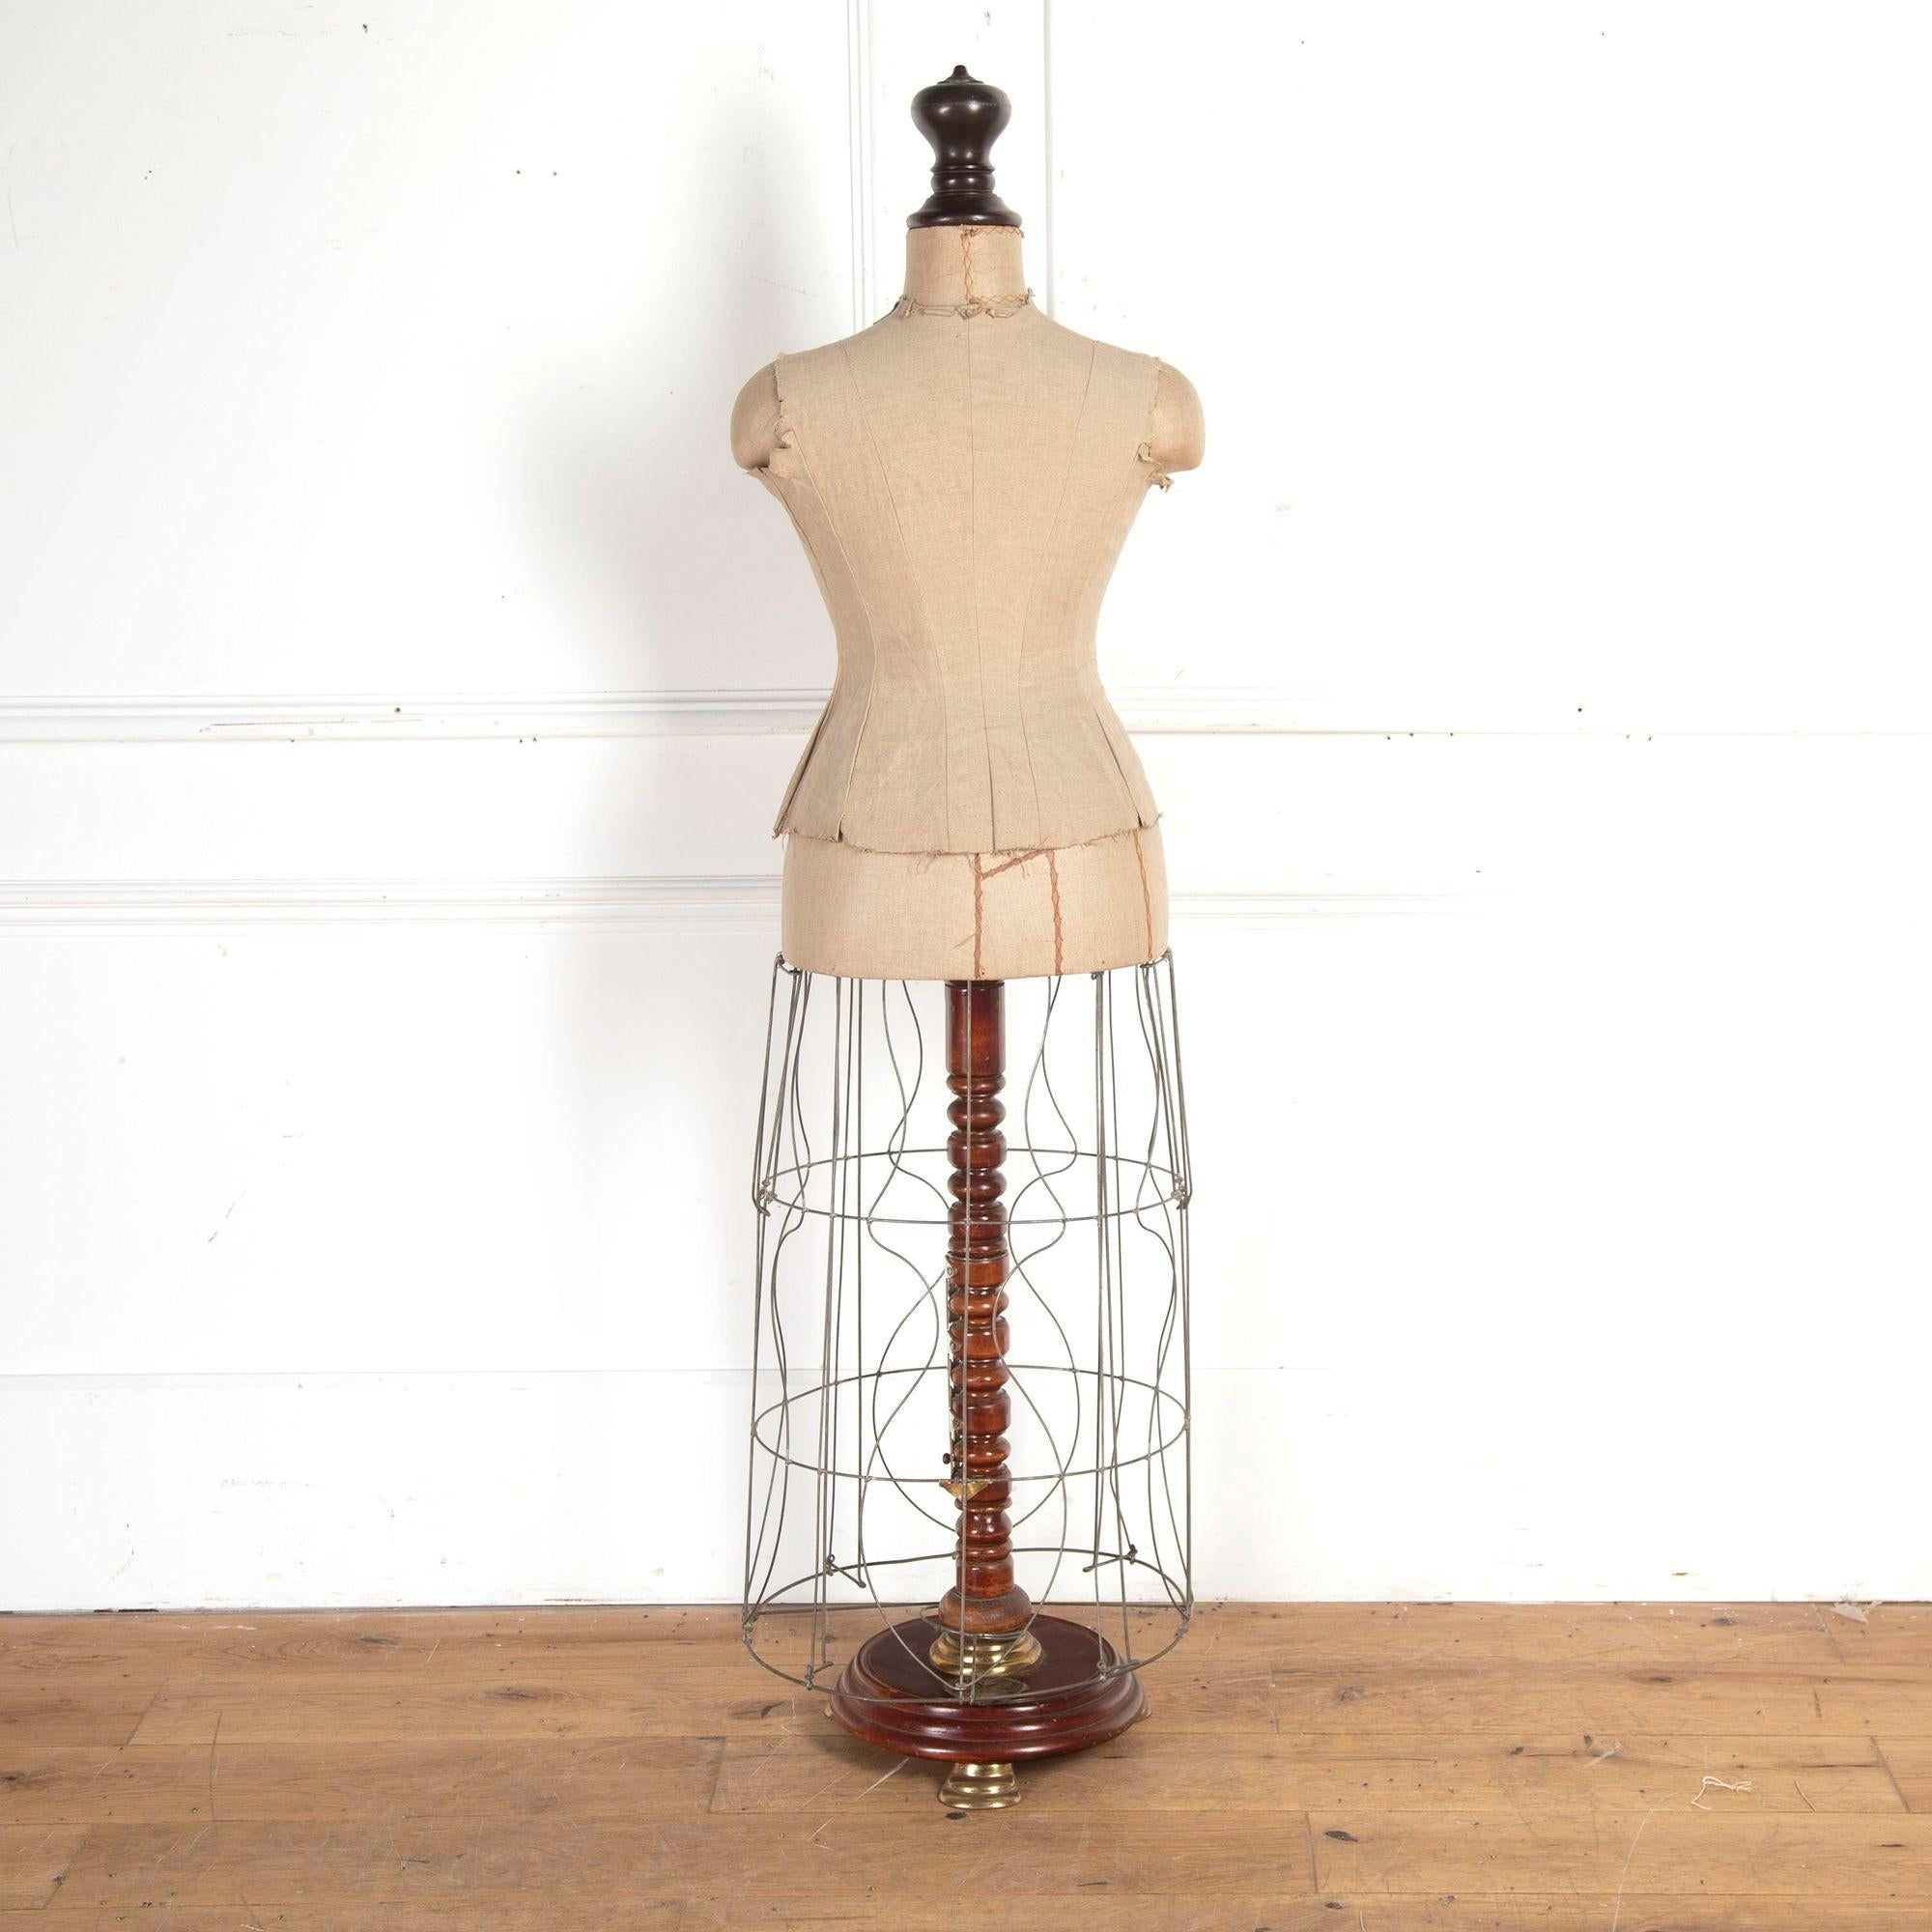 Fabulous French 20th century tailor's mannequin.
With adjustable height and metal skirt. It has a brass stamp on the base and a paper stamp on the skirt stating 